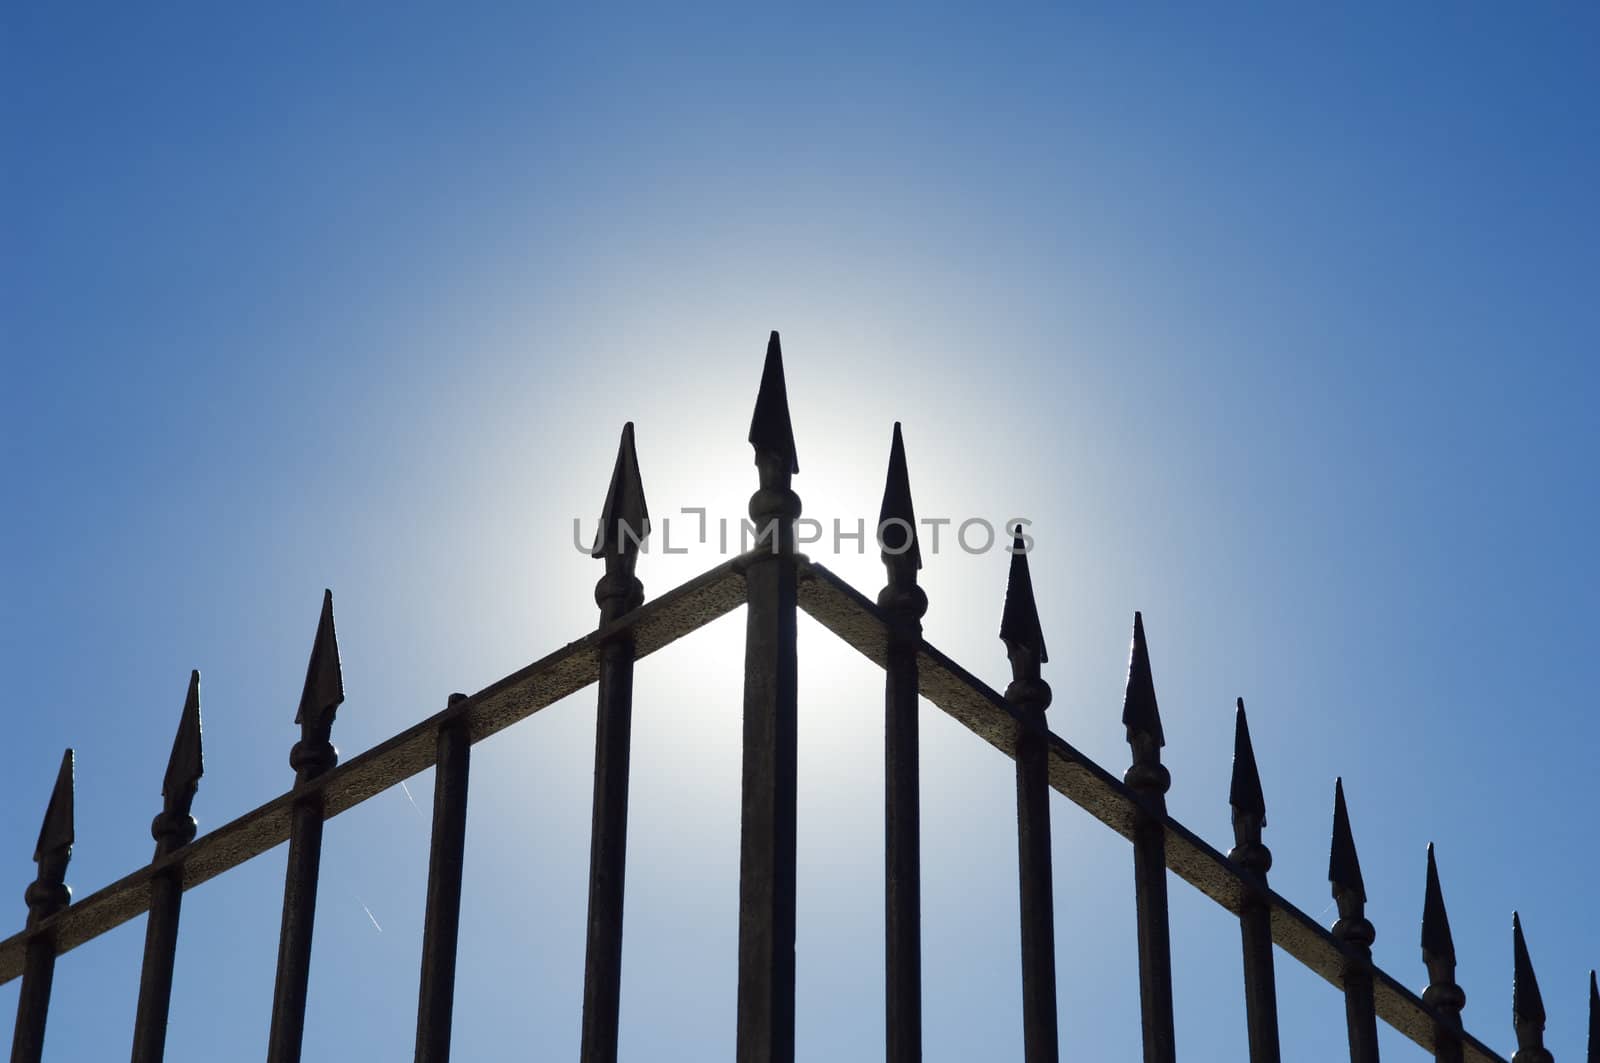 Edge of an old spiked iron railing against the shinning sun.